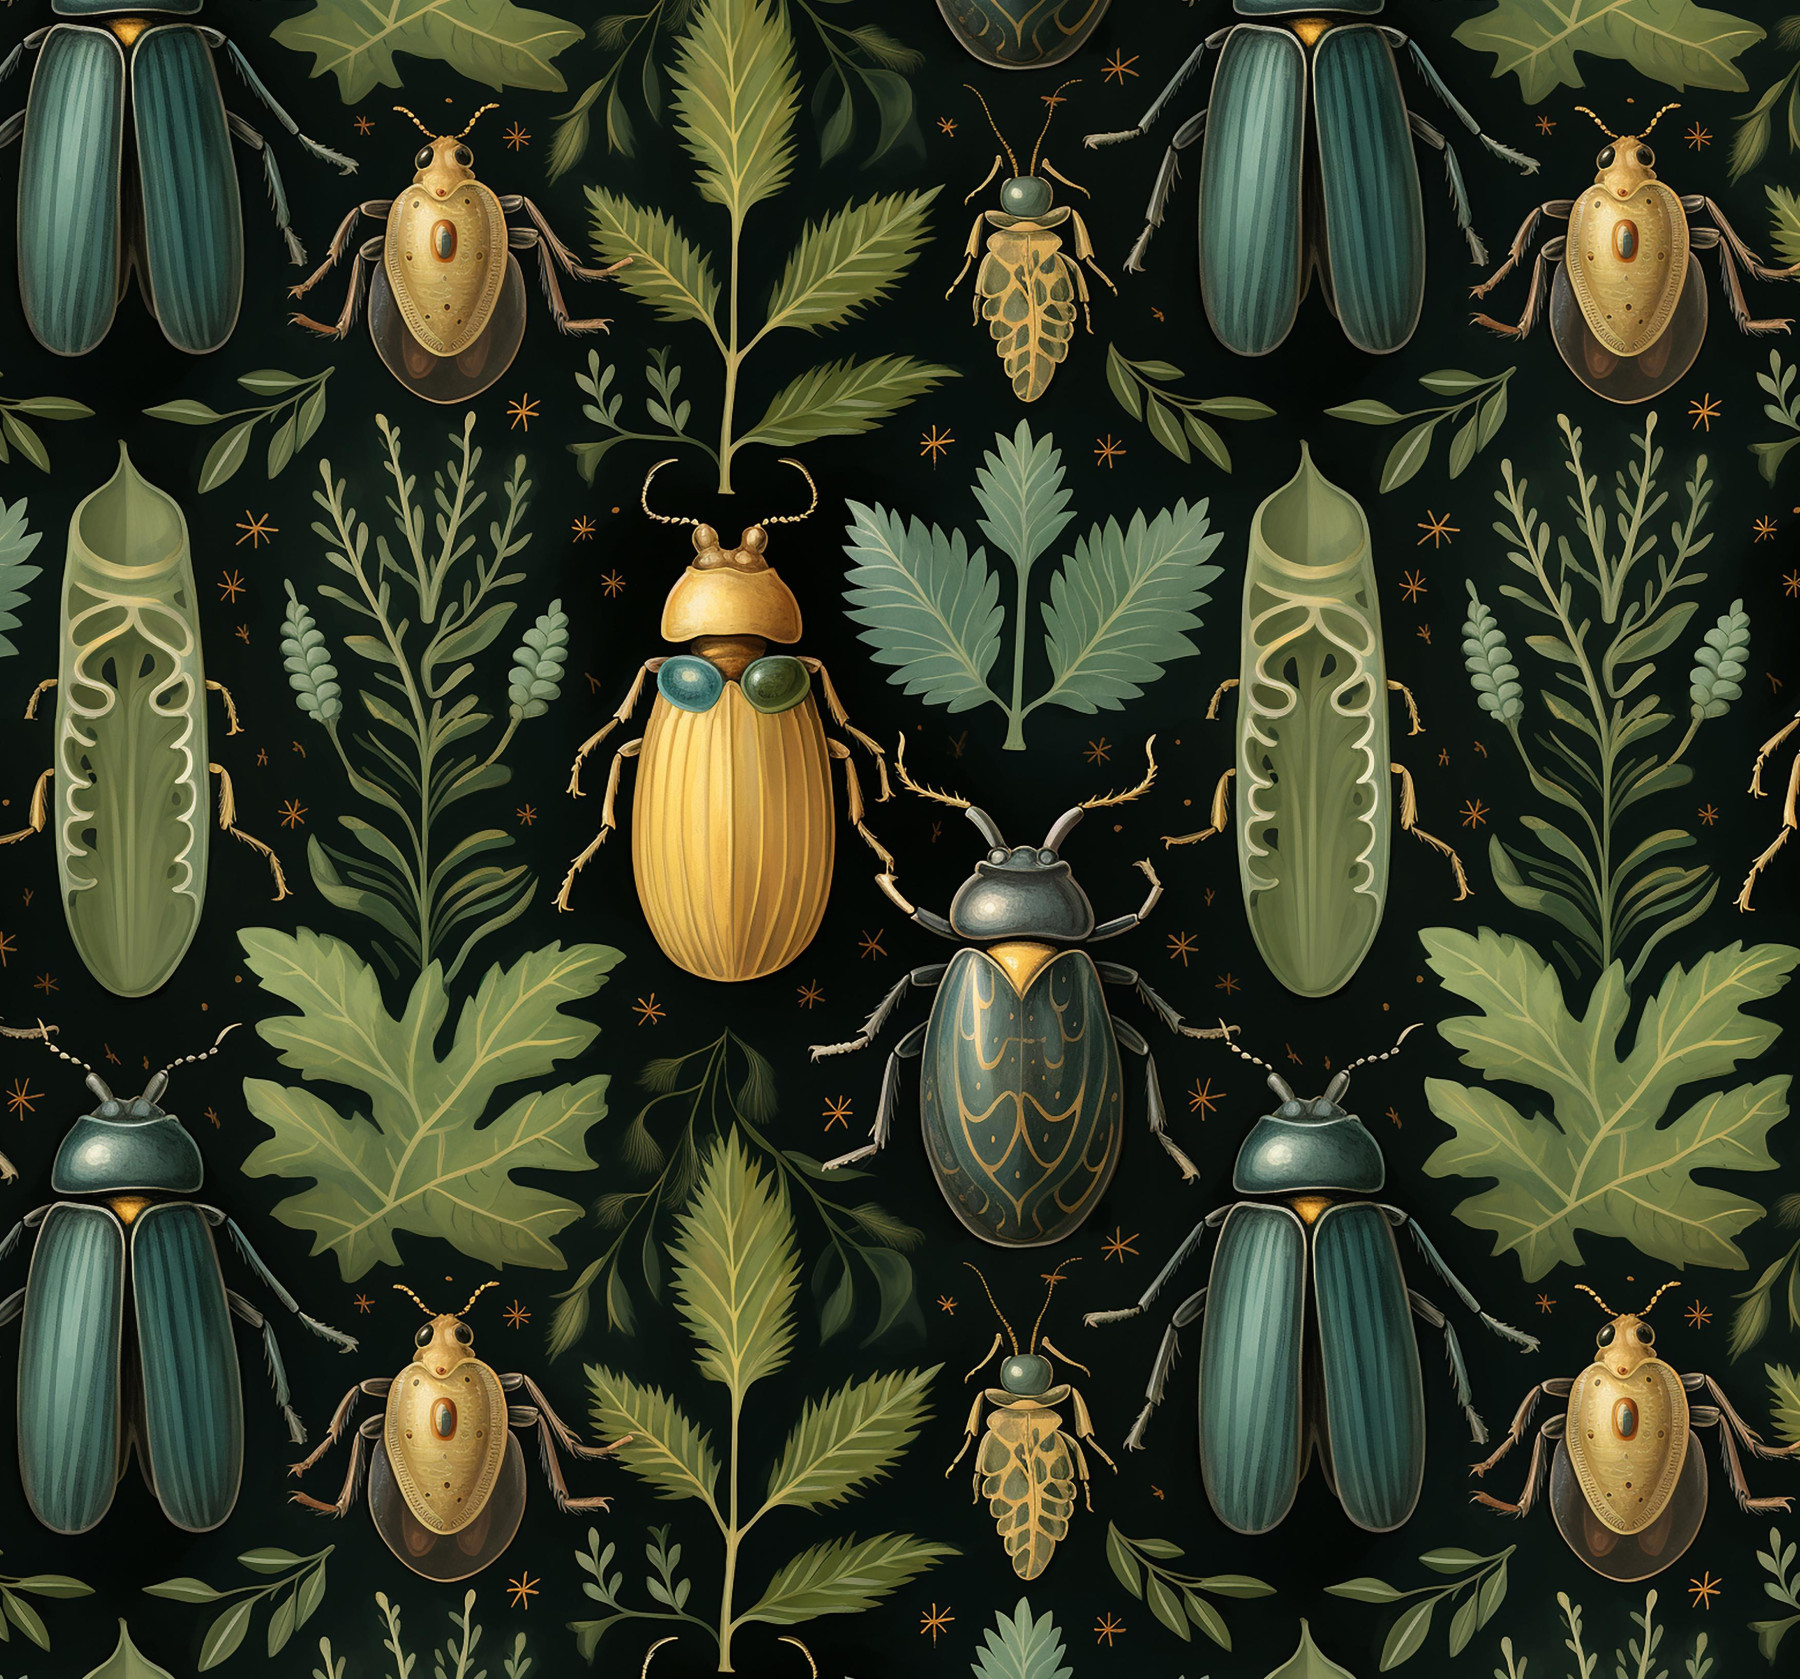 Botanical wz.1 - Woven Fabric for tablecloths